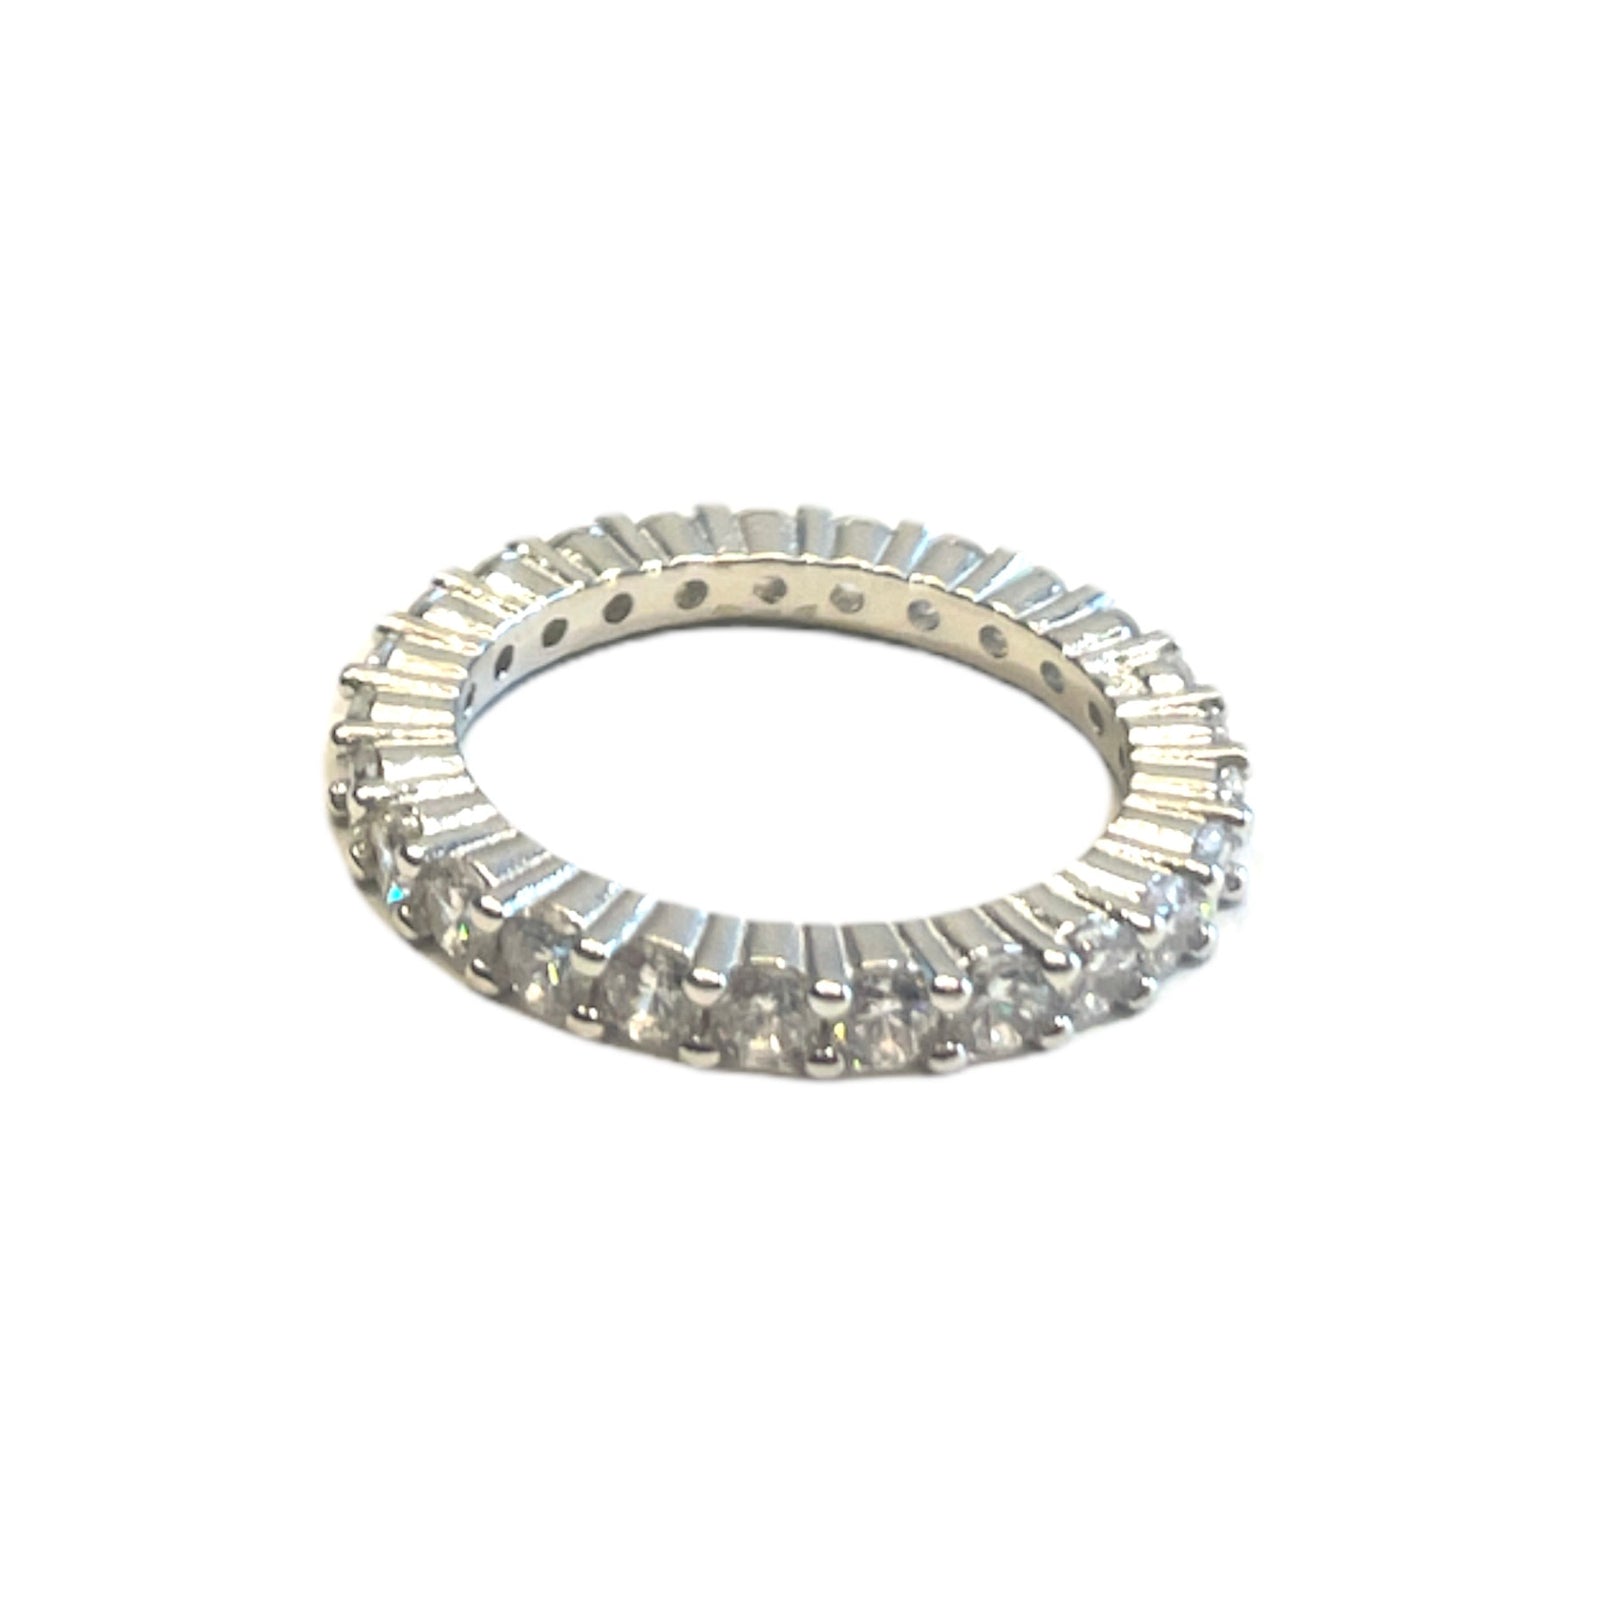 Silver Eternity band